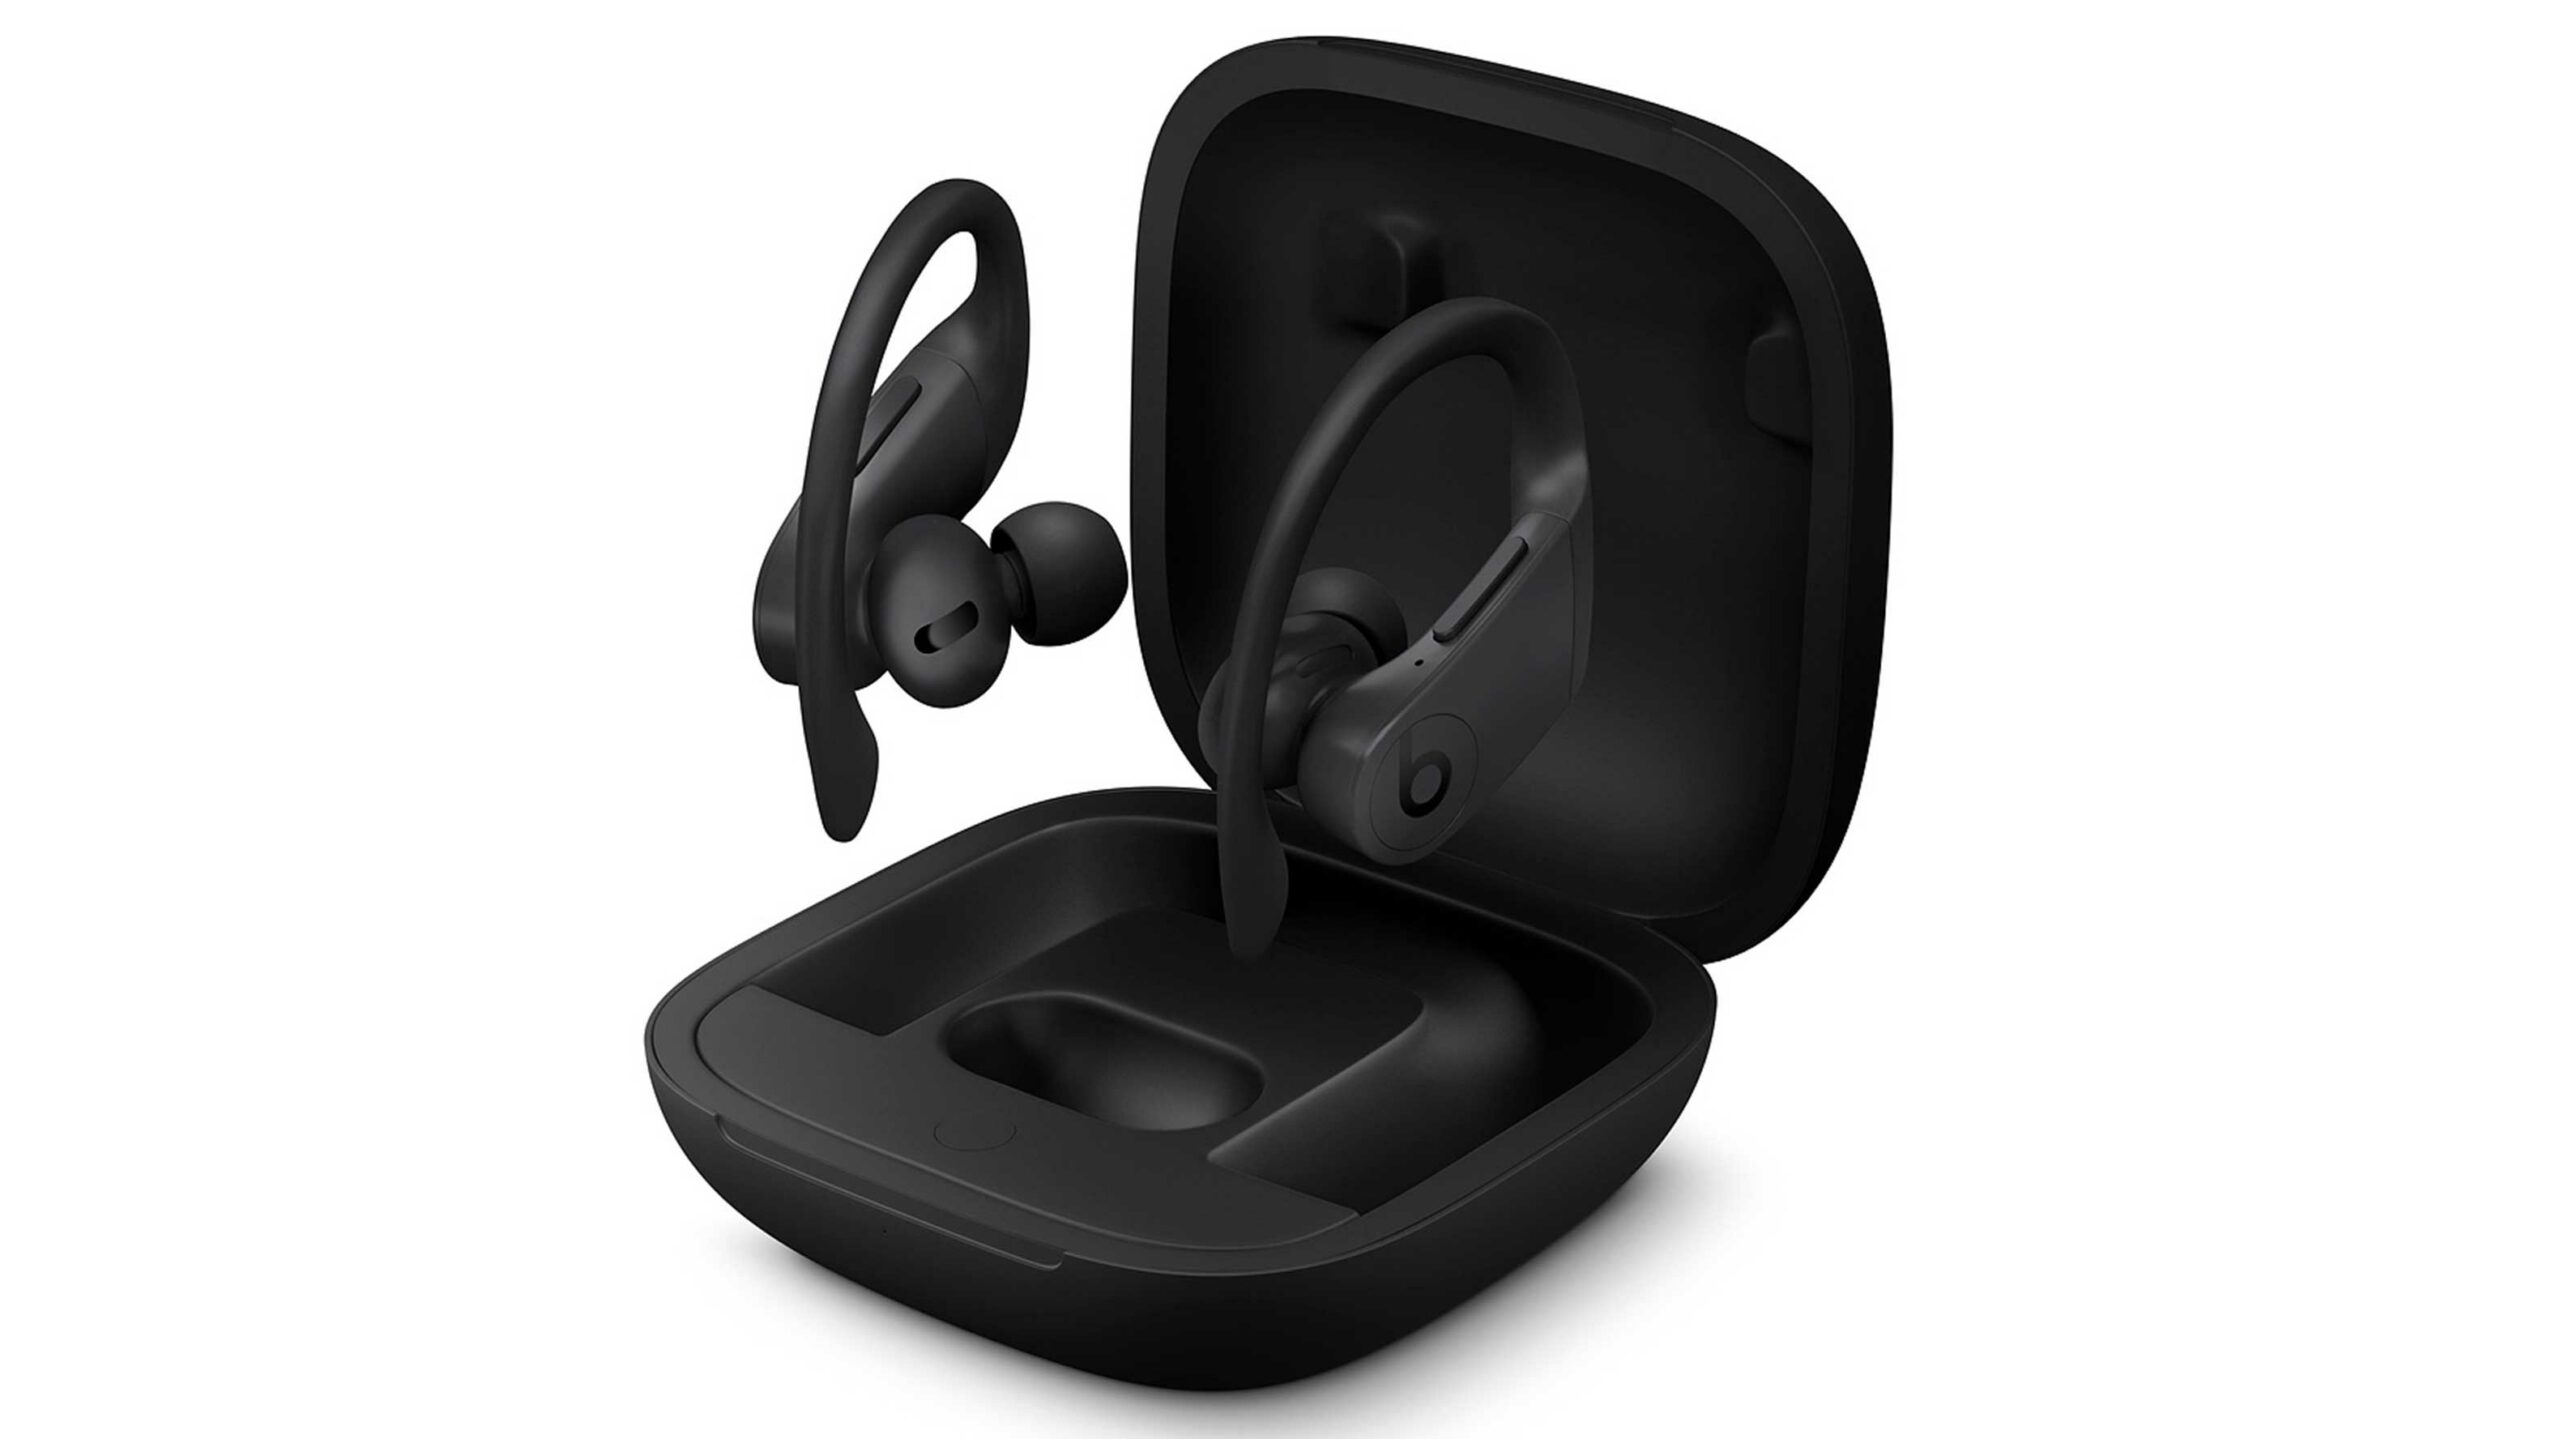 powerbeats pro connect to multiple devices